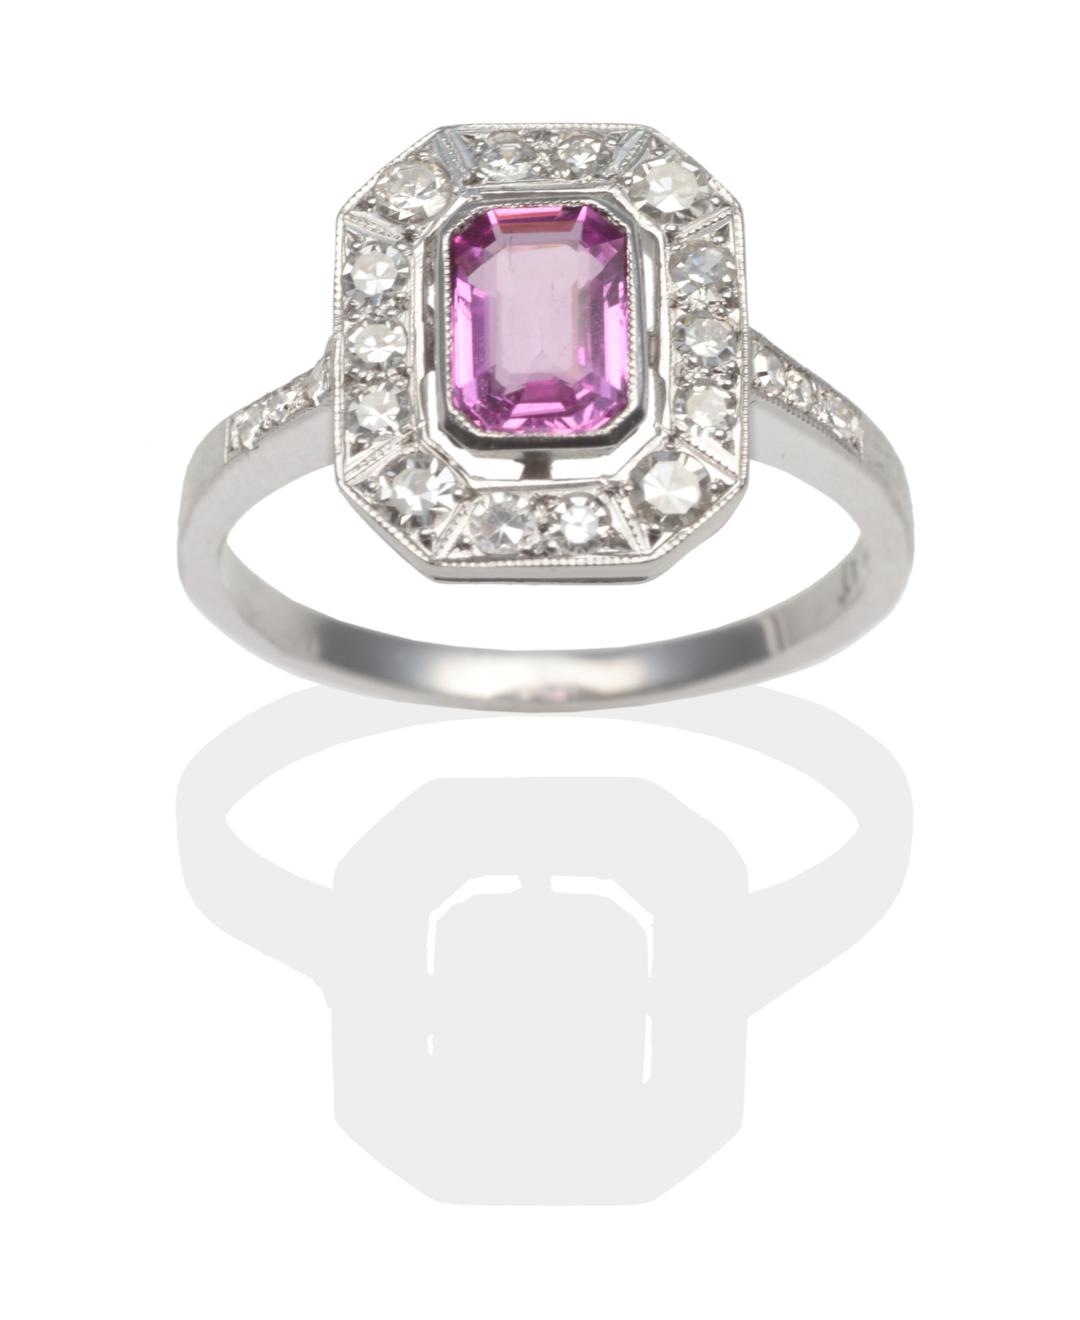 Lot 298 - A Pink Sapphire and Diamond Cluster Ring, an emerald-cut pink sapphire within a conforming...